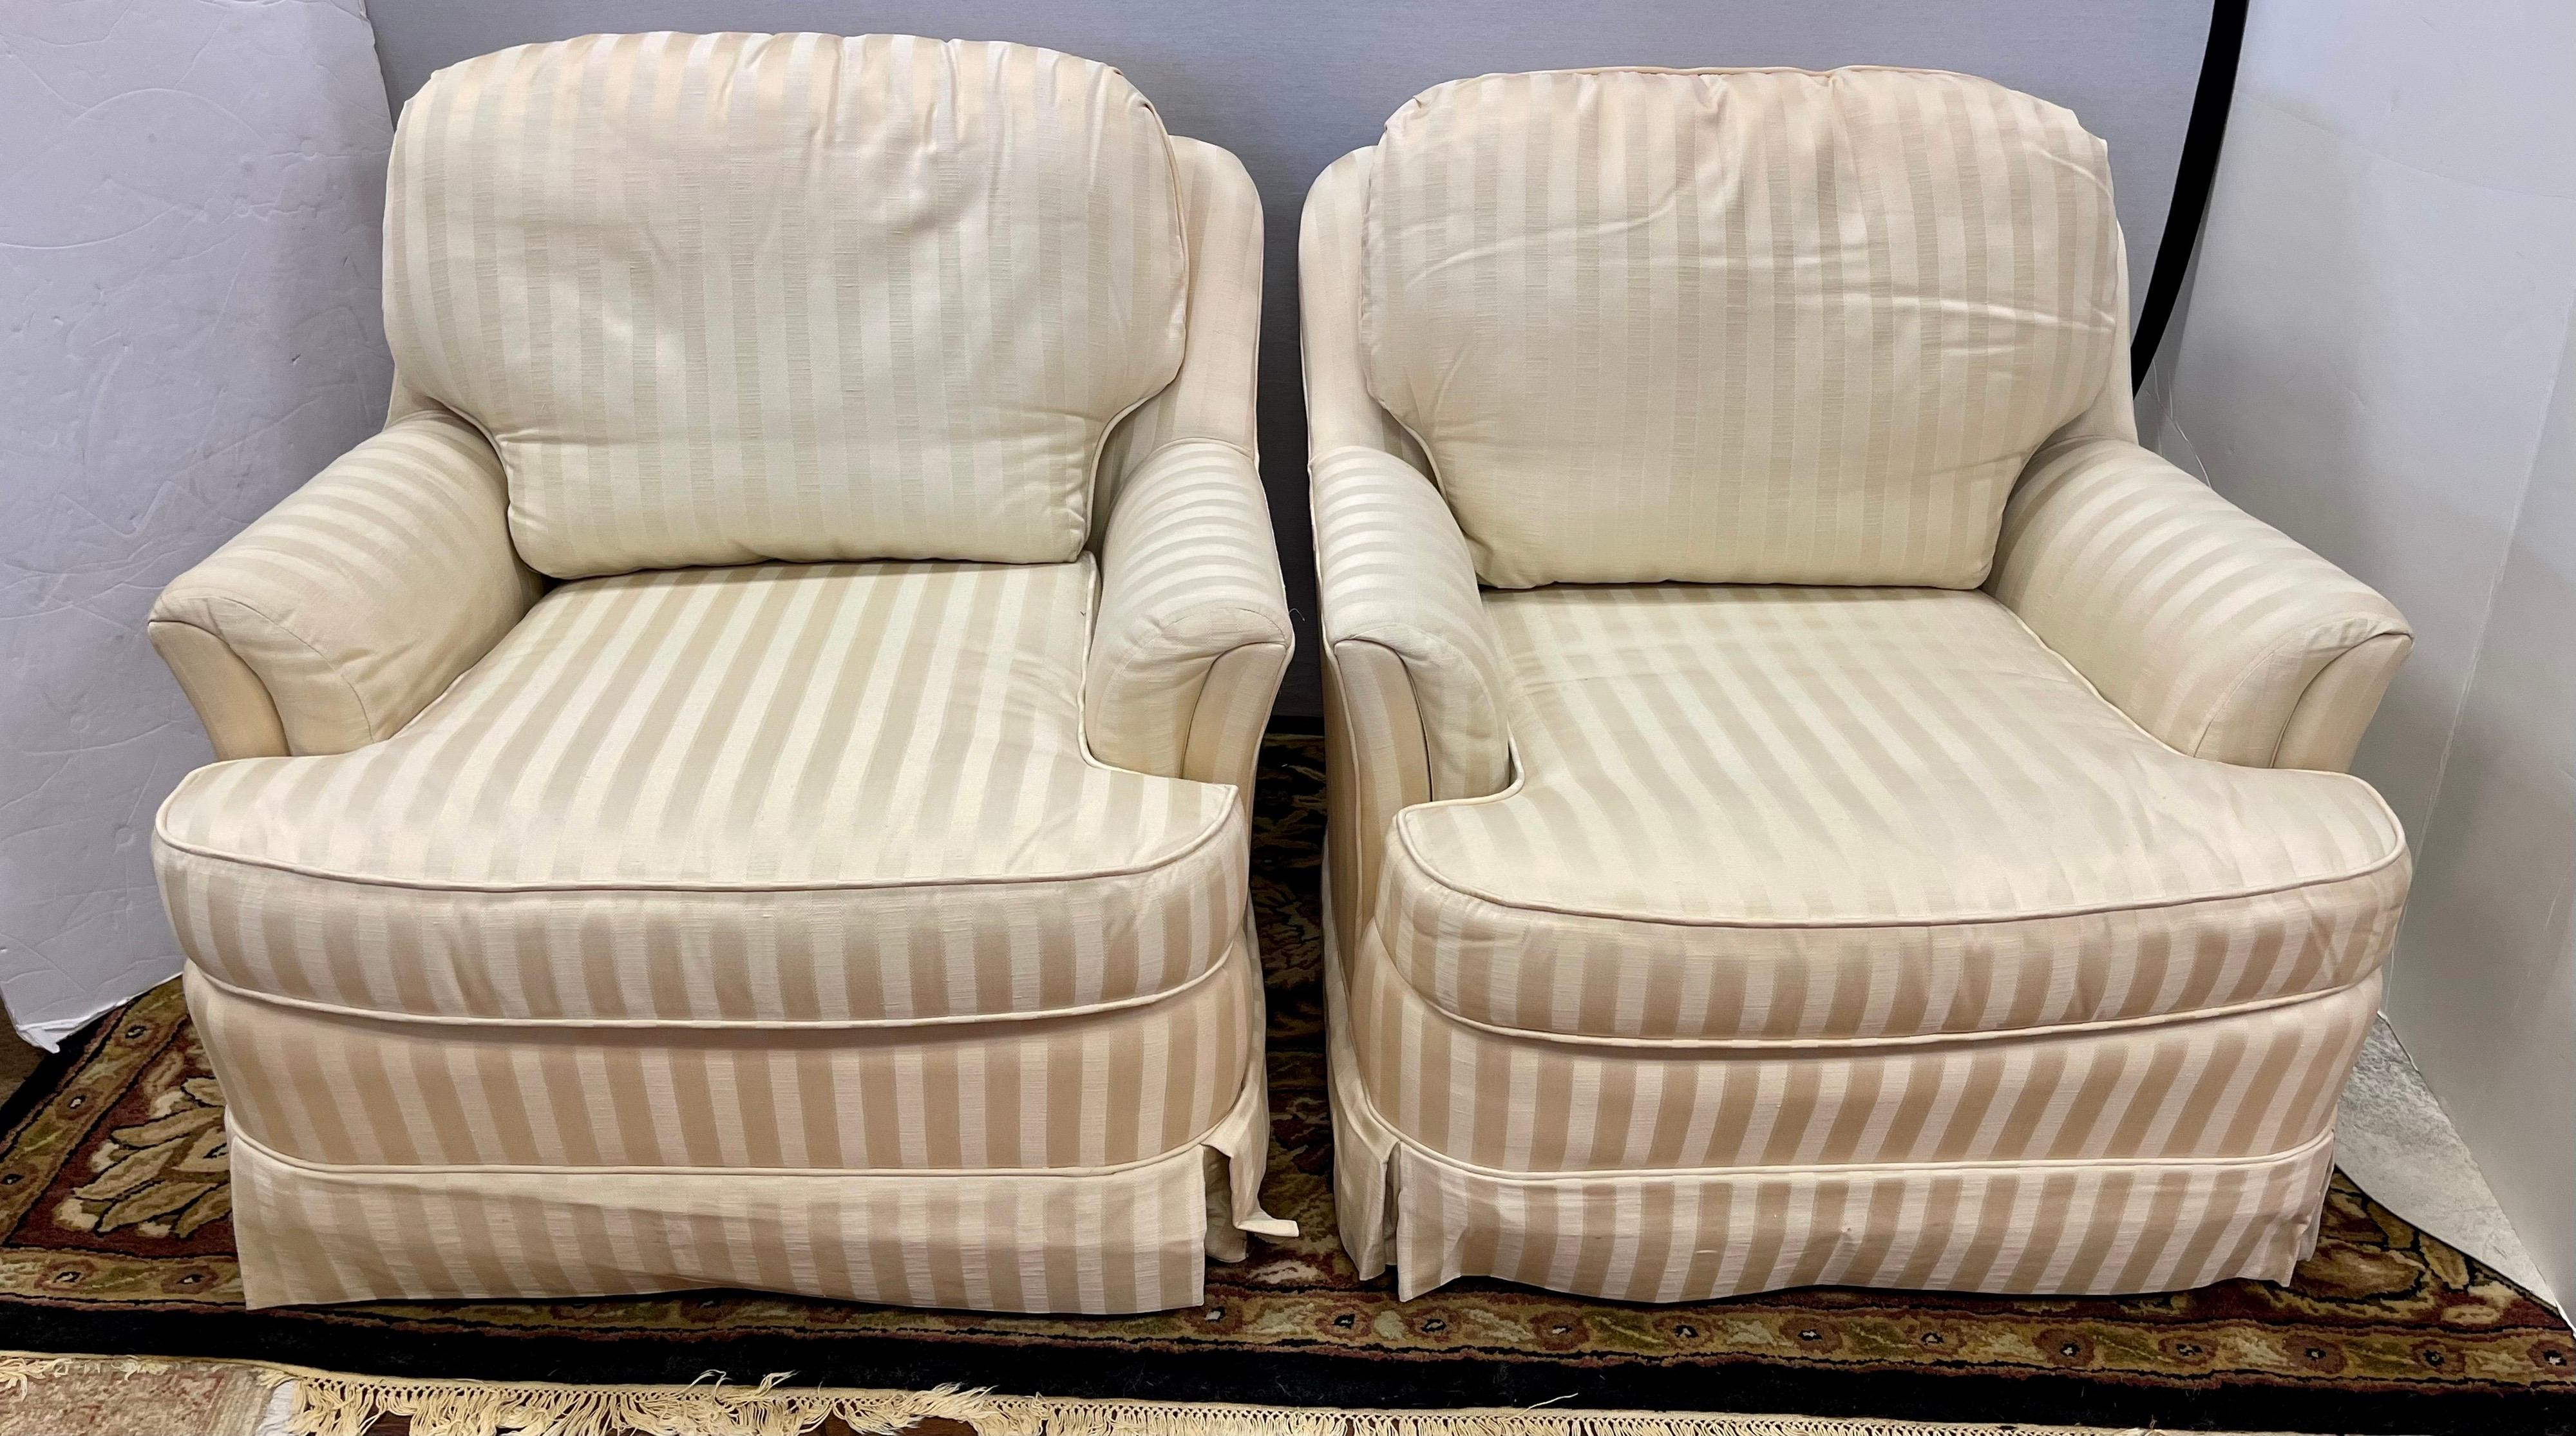 Elegant pair of matching striped club chairs by Century Furniture. Made in the USA. Great scale and better lines. The colors are gold and beige.